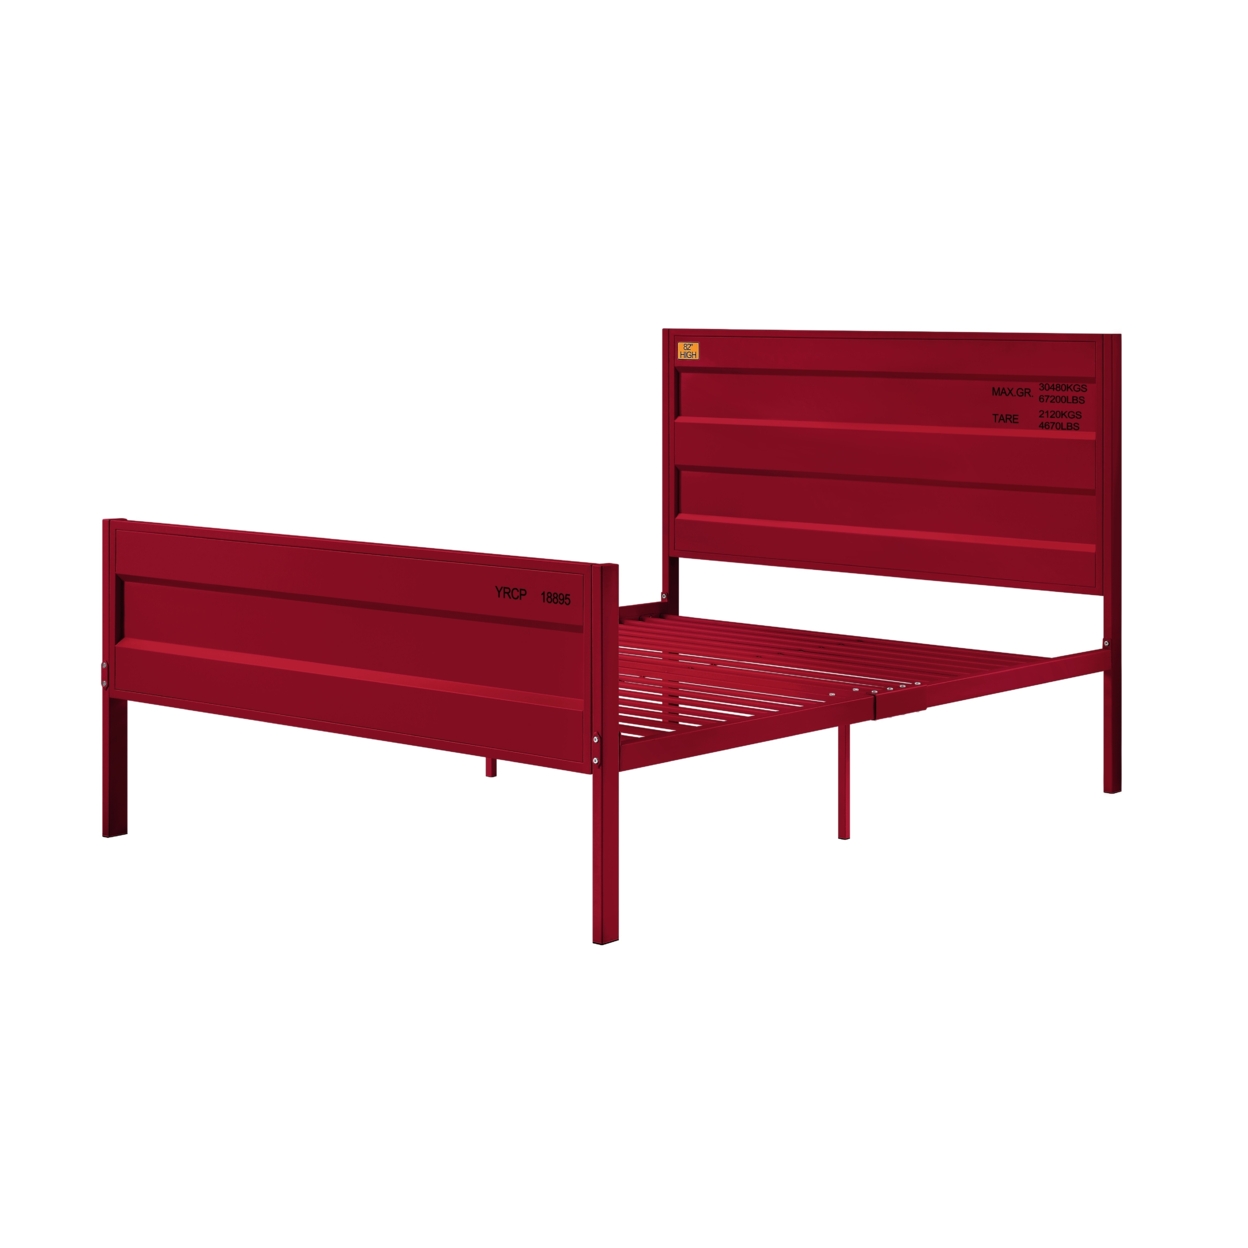 Industrial Style Metal Full Size Bed With Straight Leg Support, Red- Saltoro Sherpi